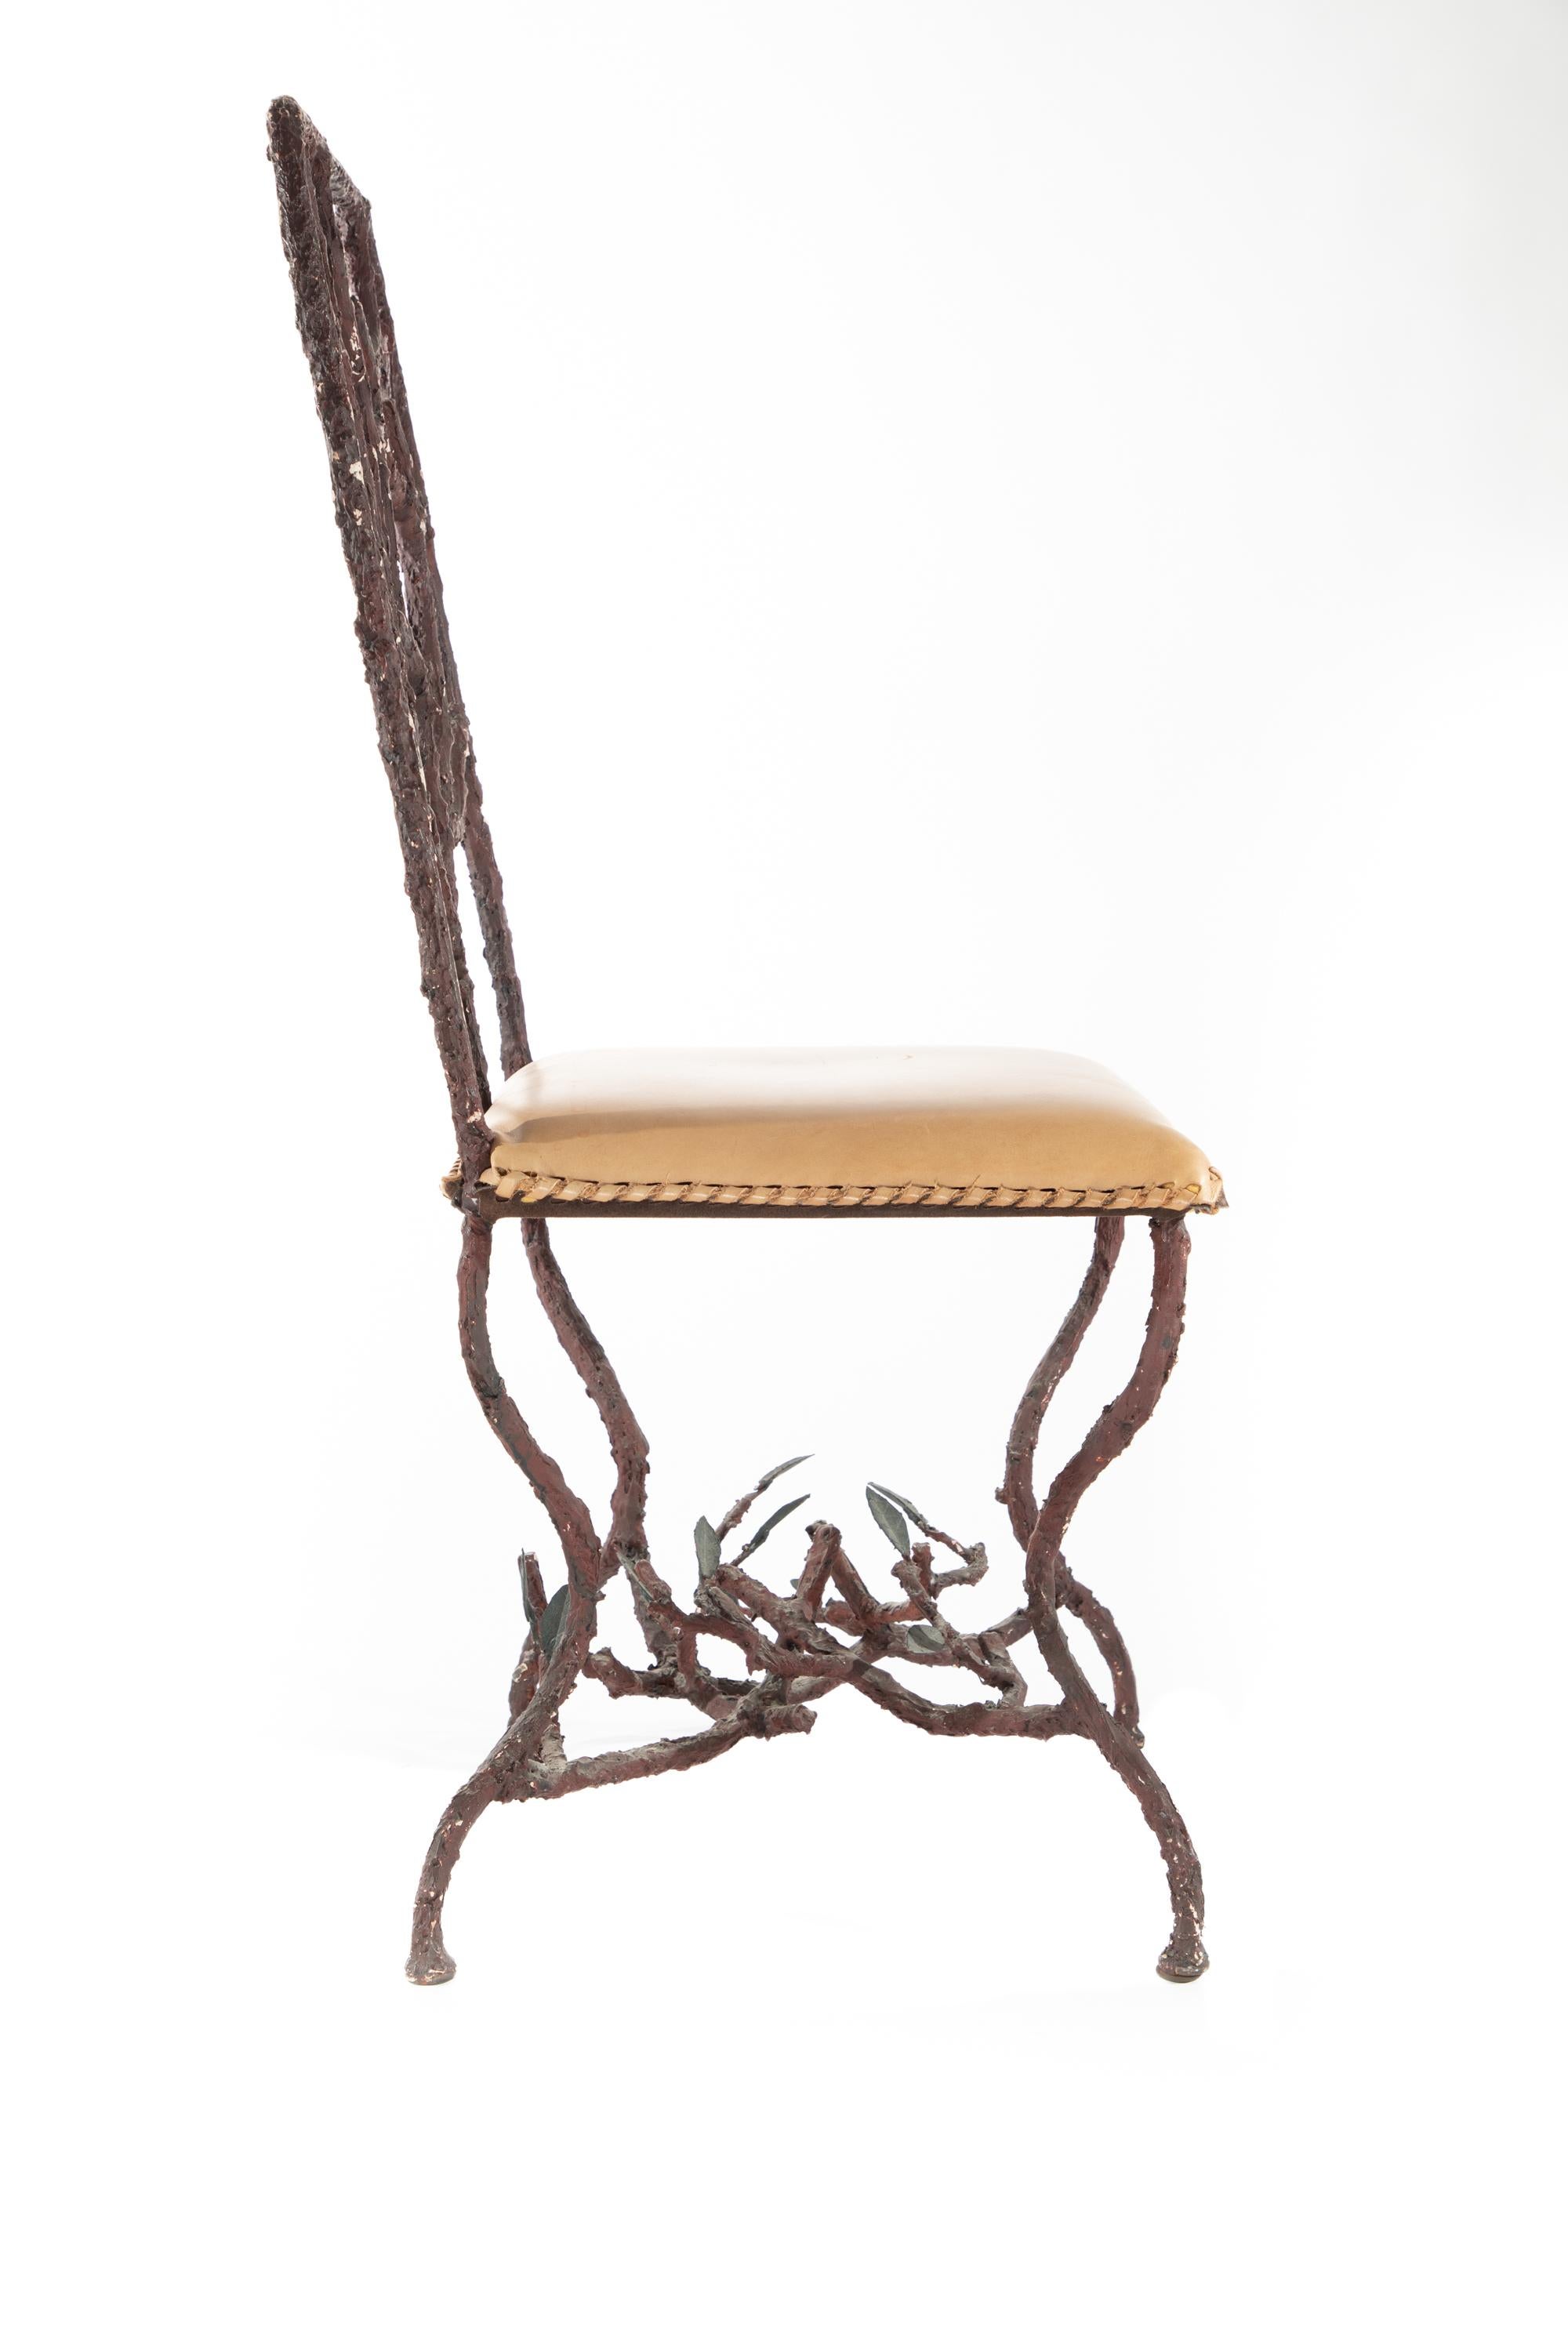 Painted Giacometti Style Sculptural Grotto Chair For Sale